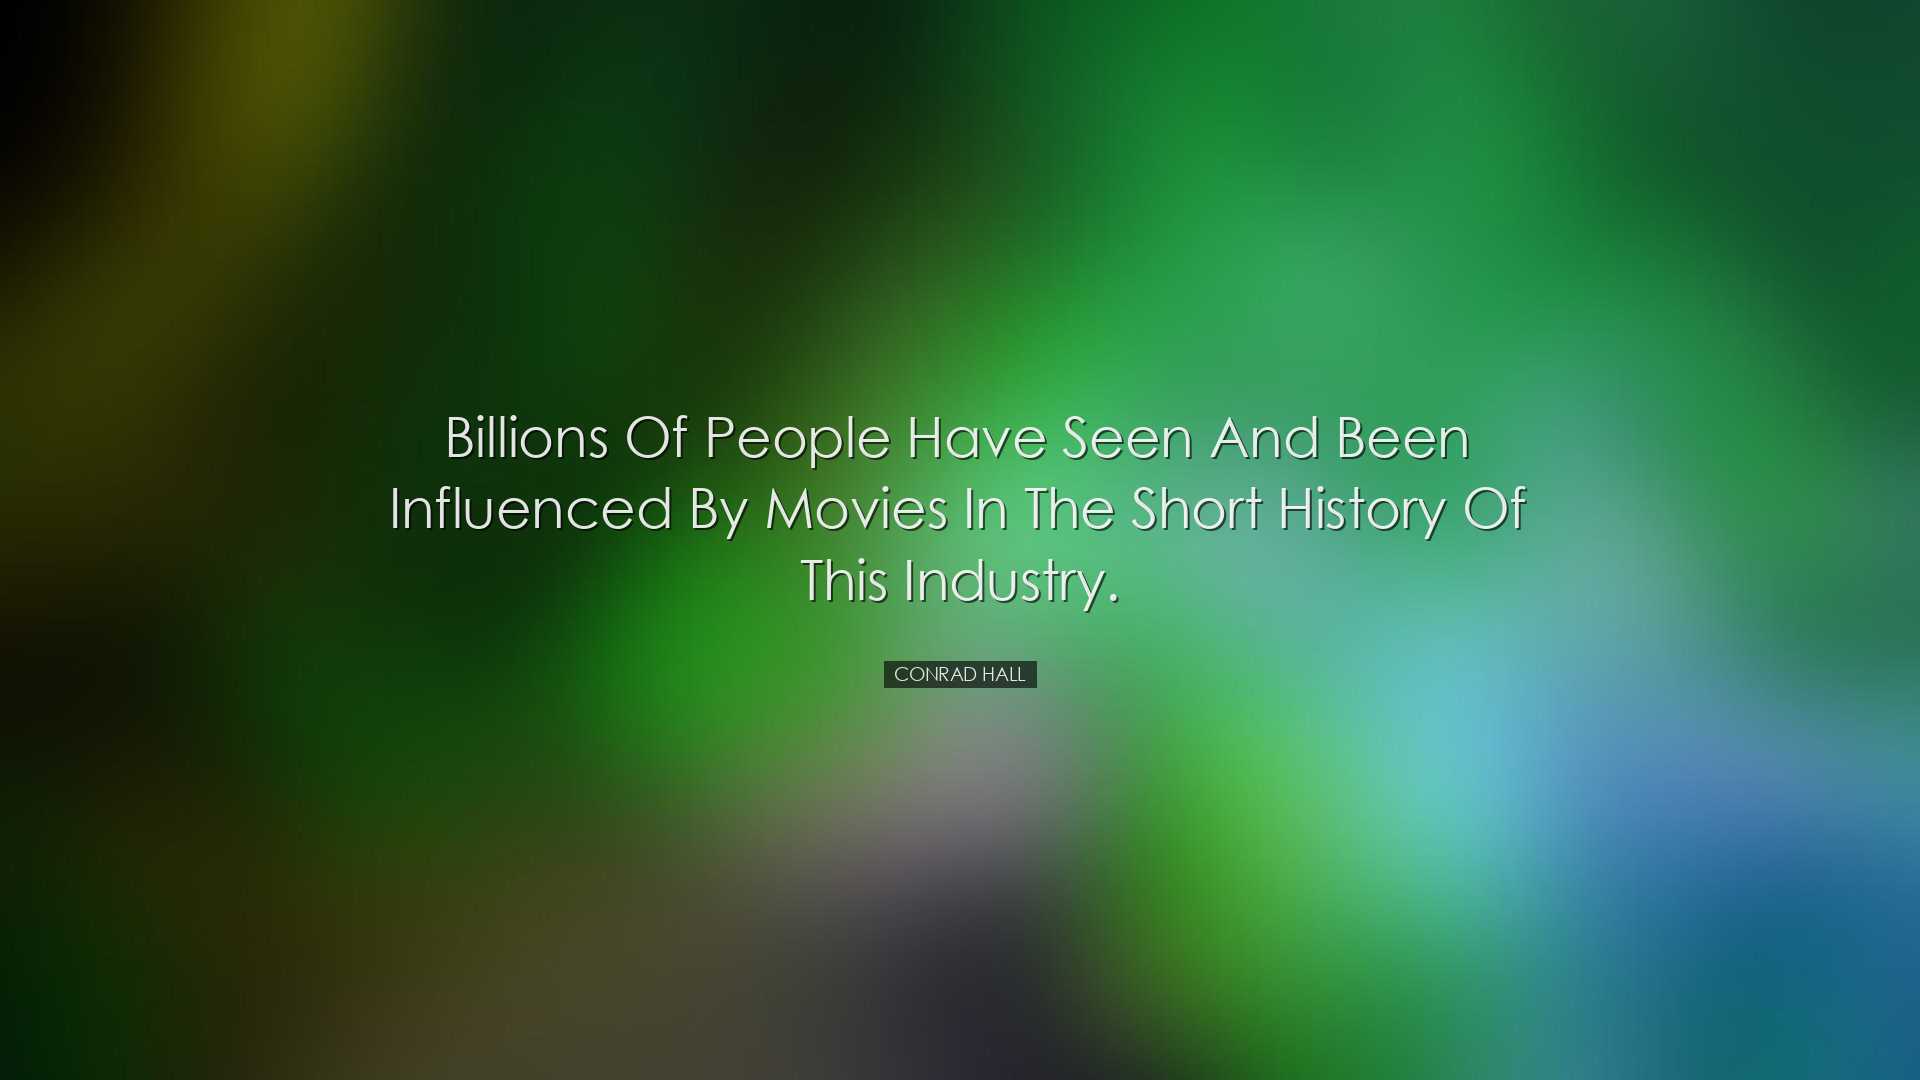 Billions of people have seen and been influenced by movies in the